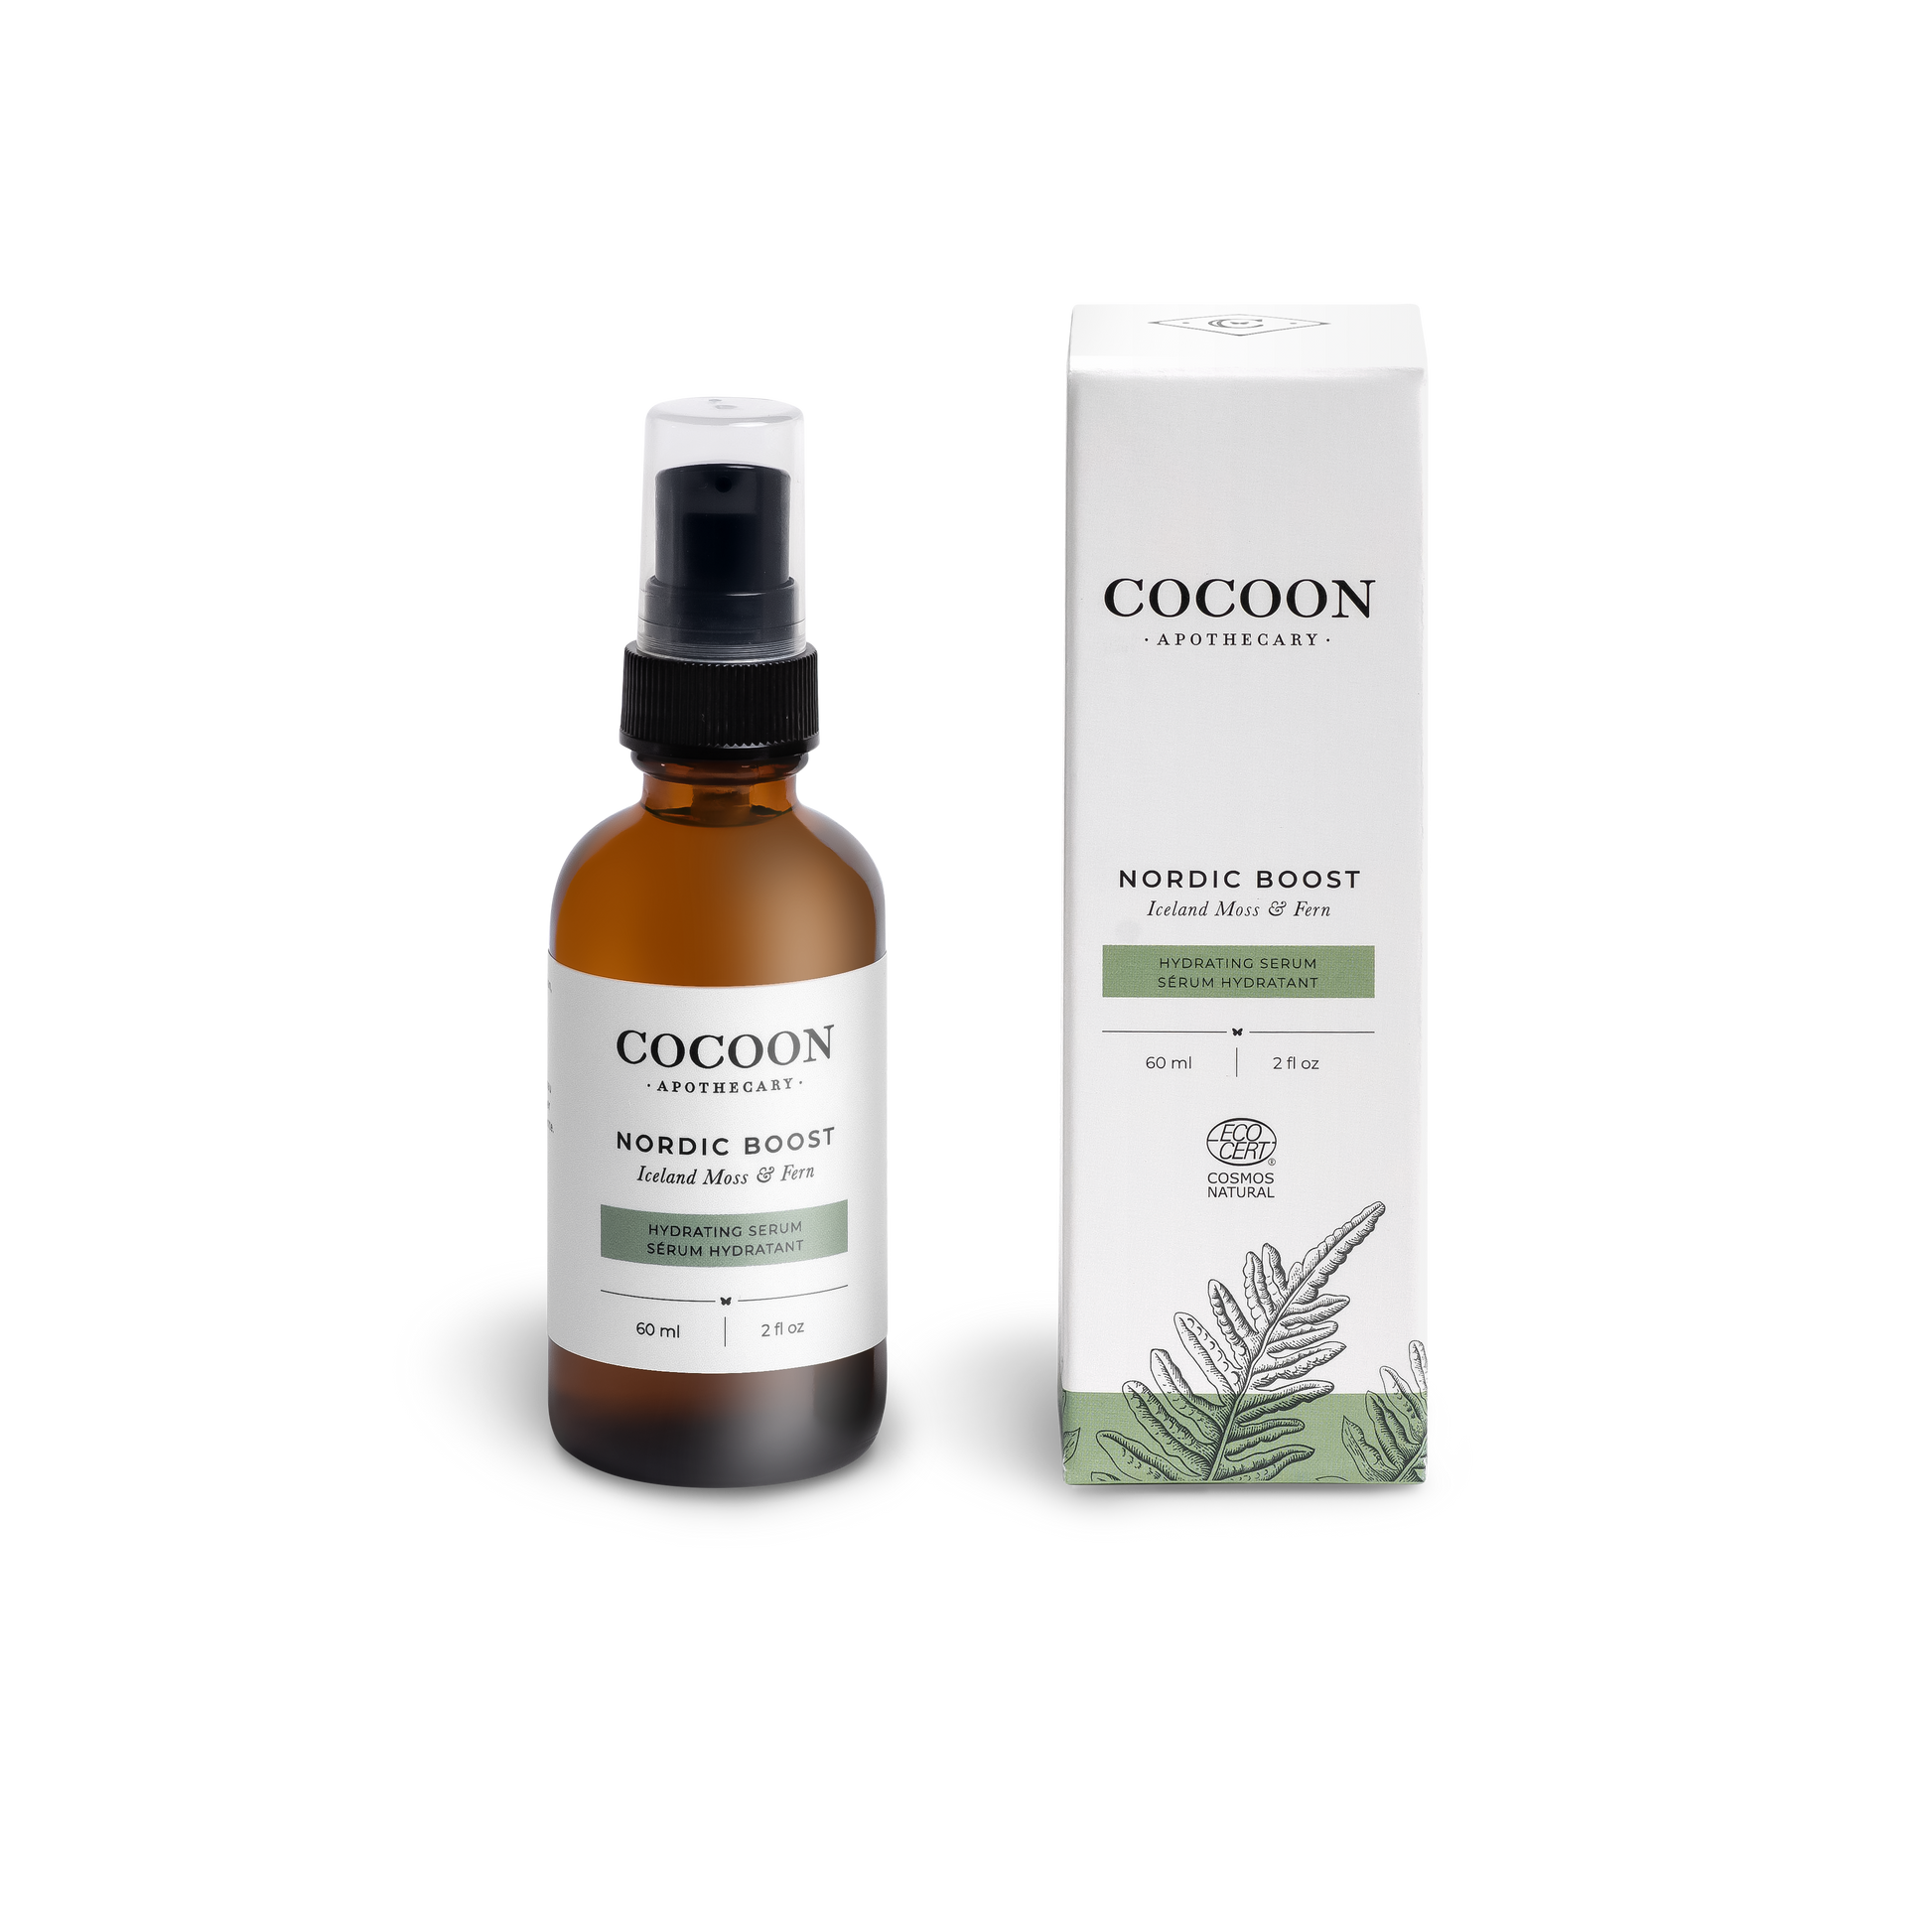 hydrating hyaluronic acid serum with fern, moss, and litchen. Certified natural.